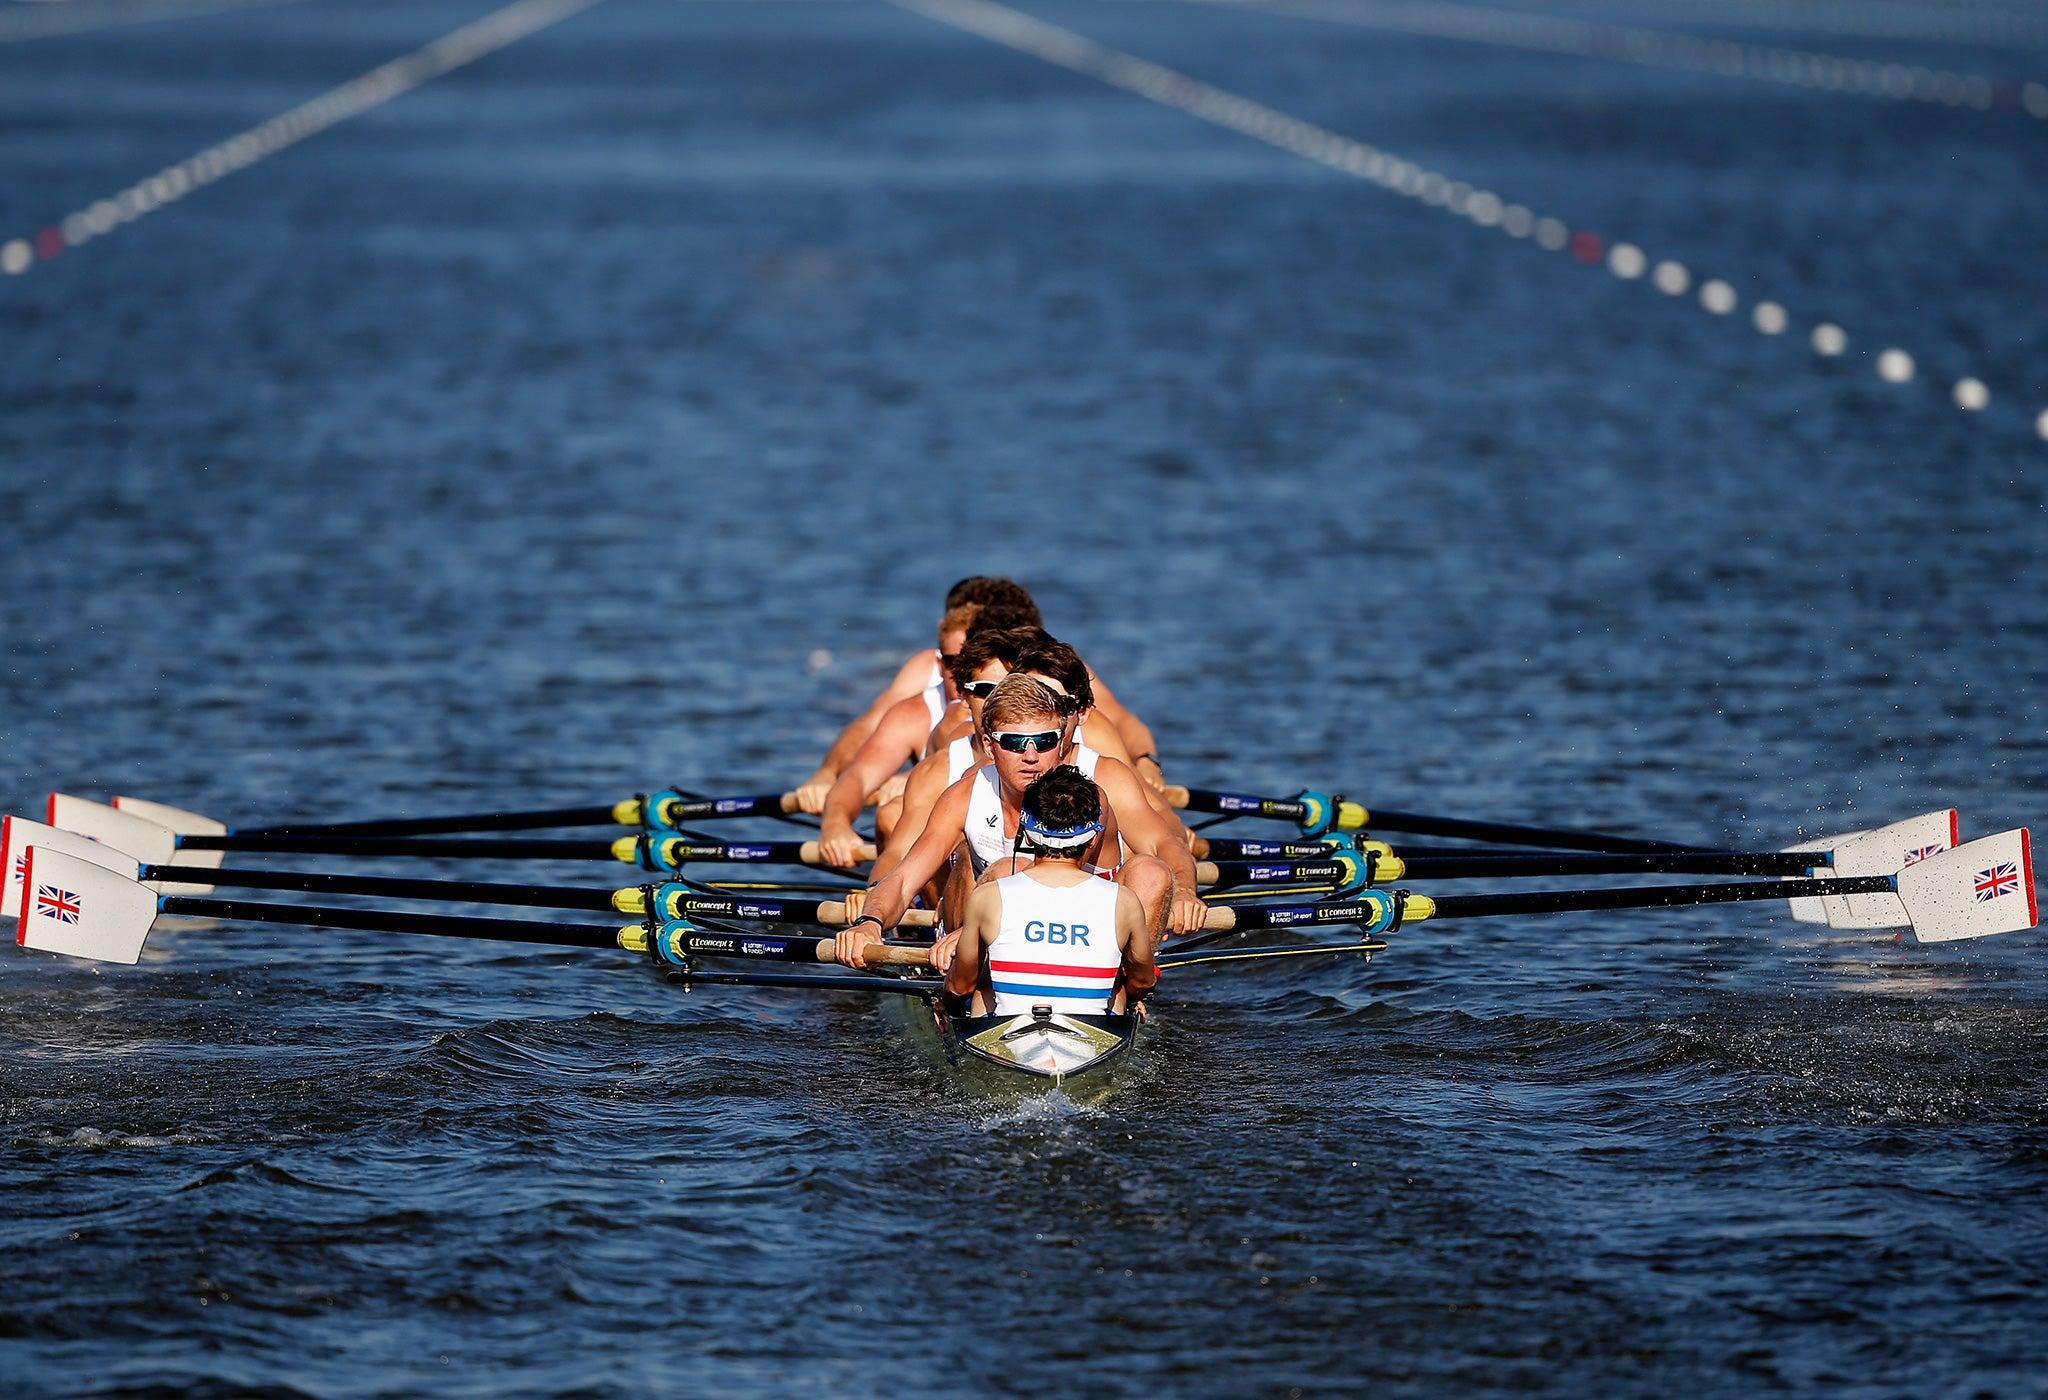 The team GB rowing team won the World Championships in 2014